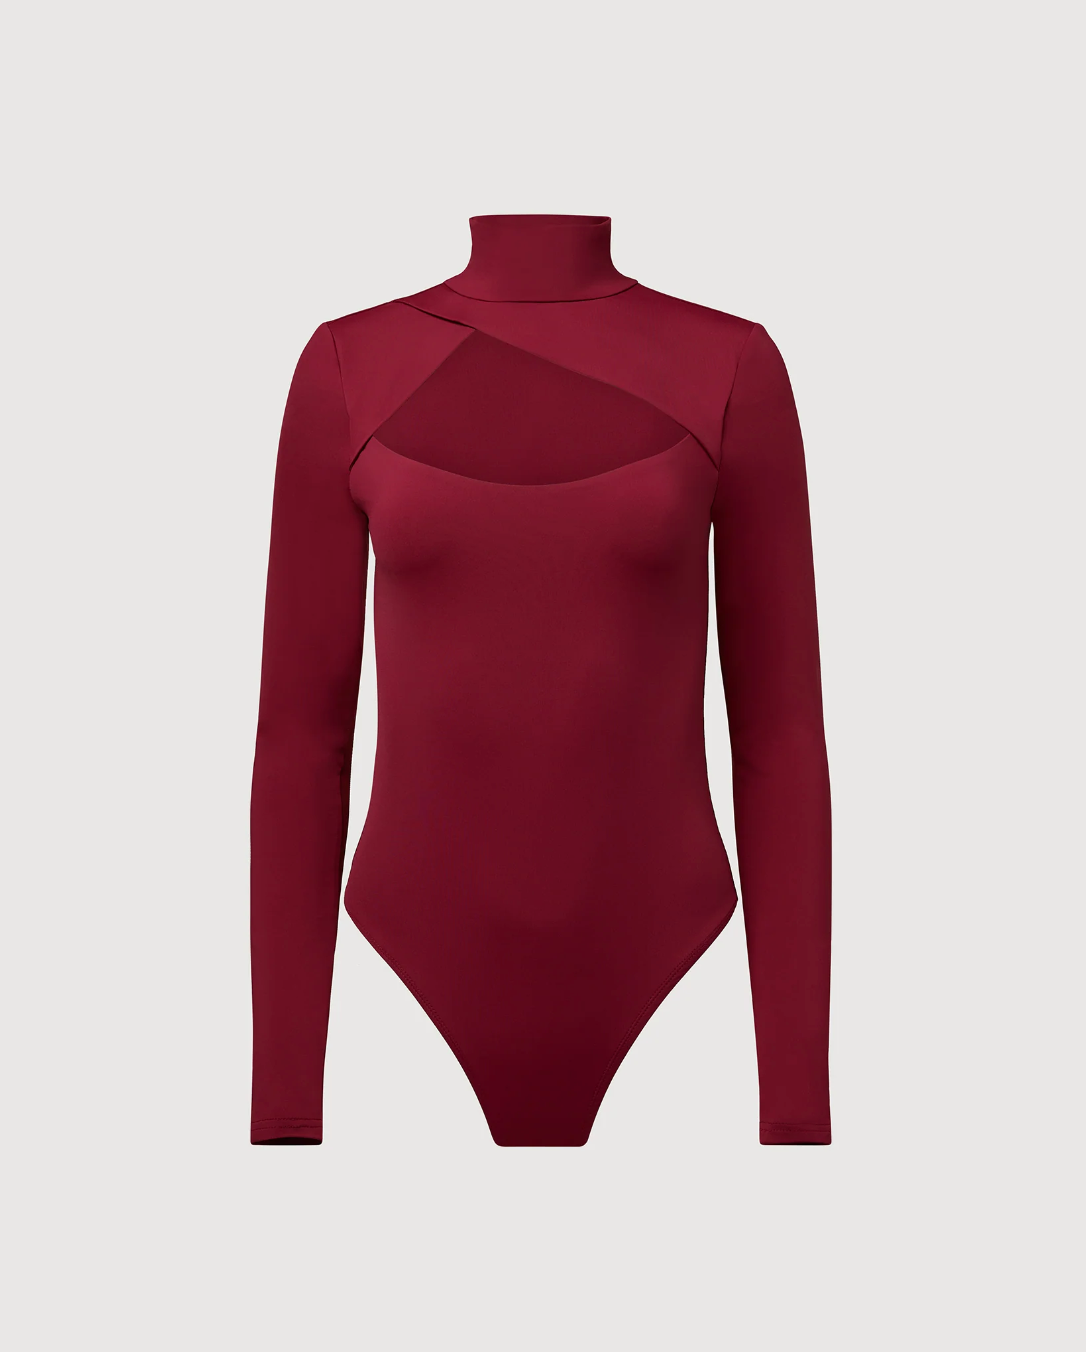 Photo of cut out bodysuit in red wine colour from Rachel Parcell available at UniKoncept in Waterloo